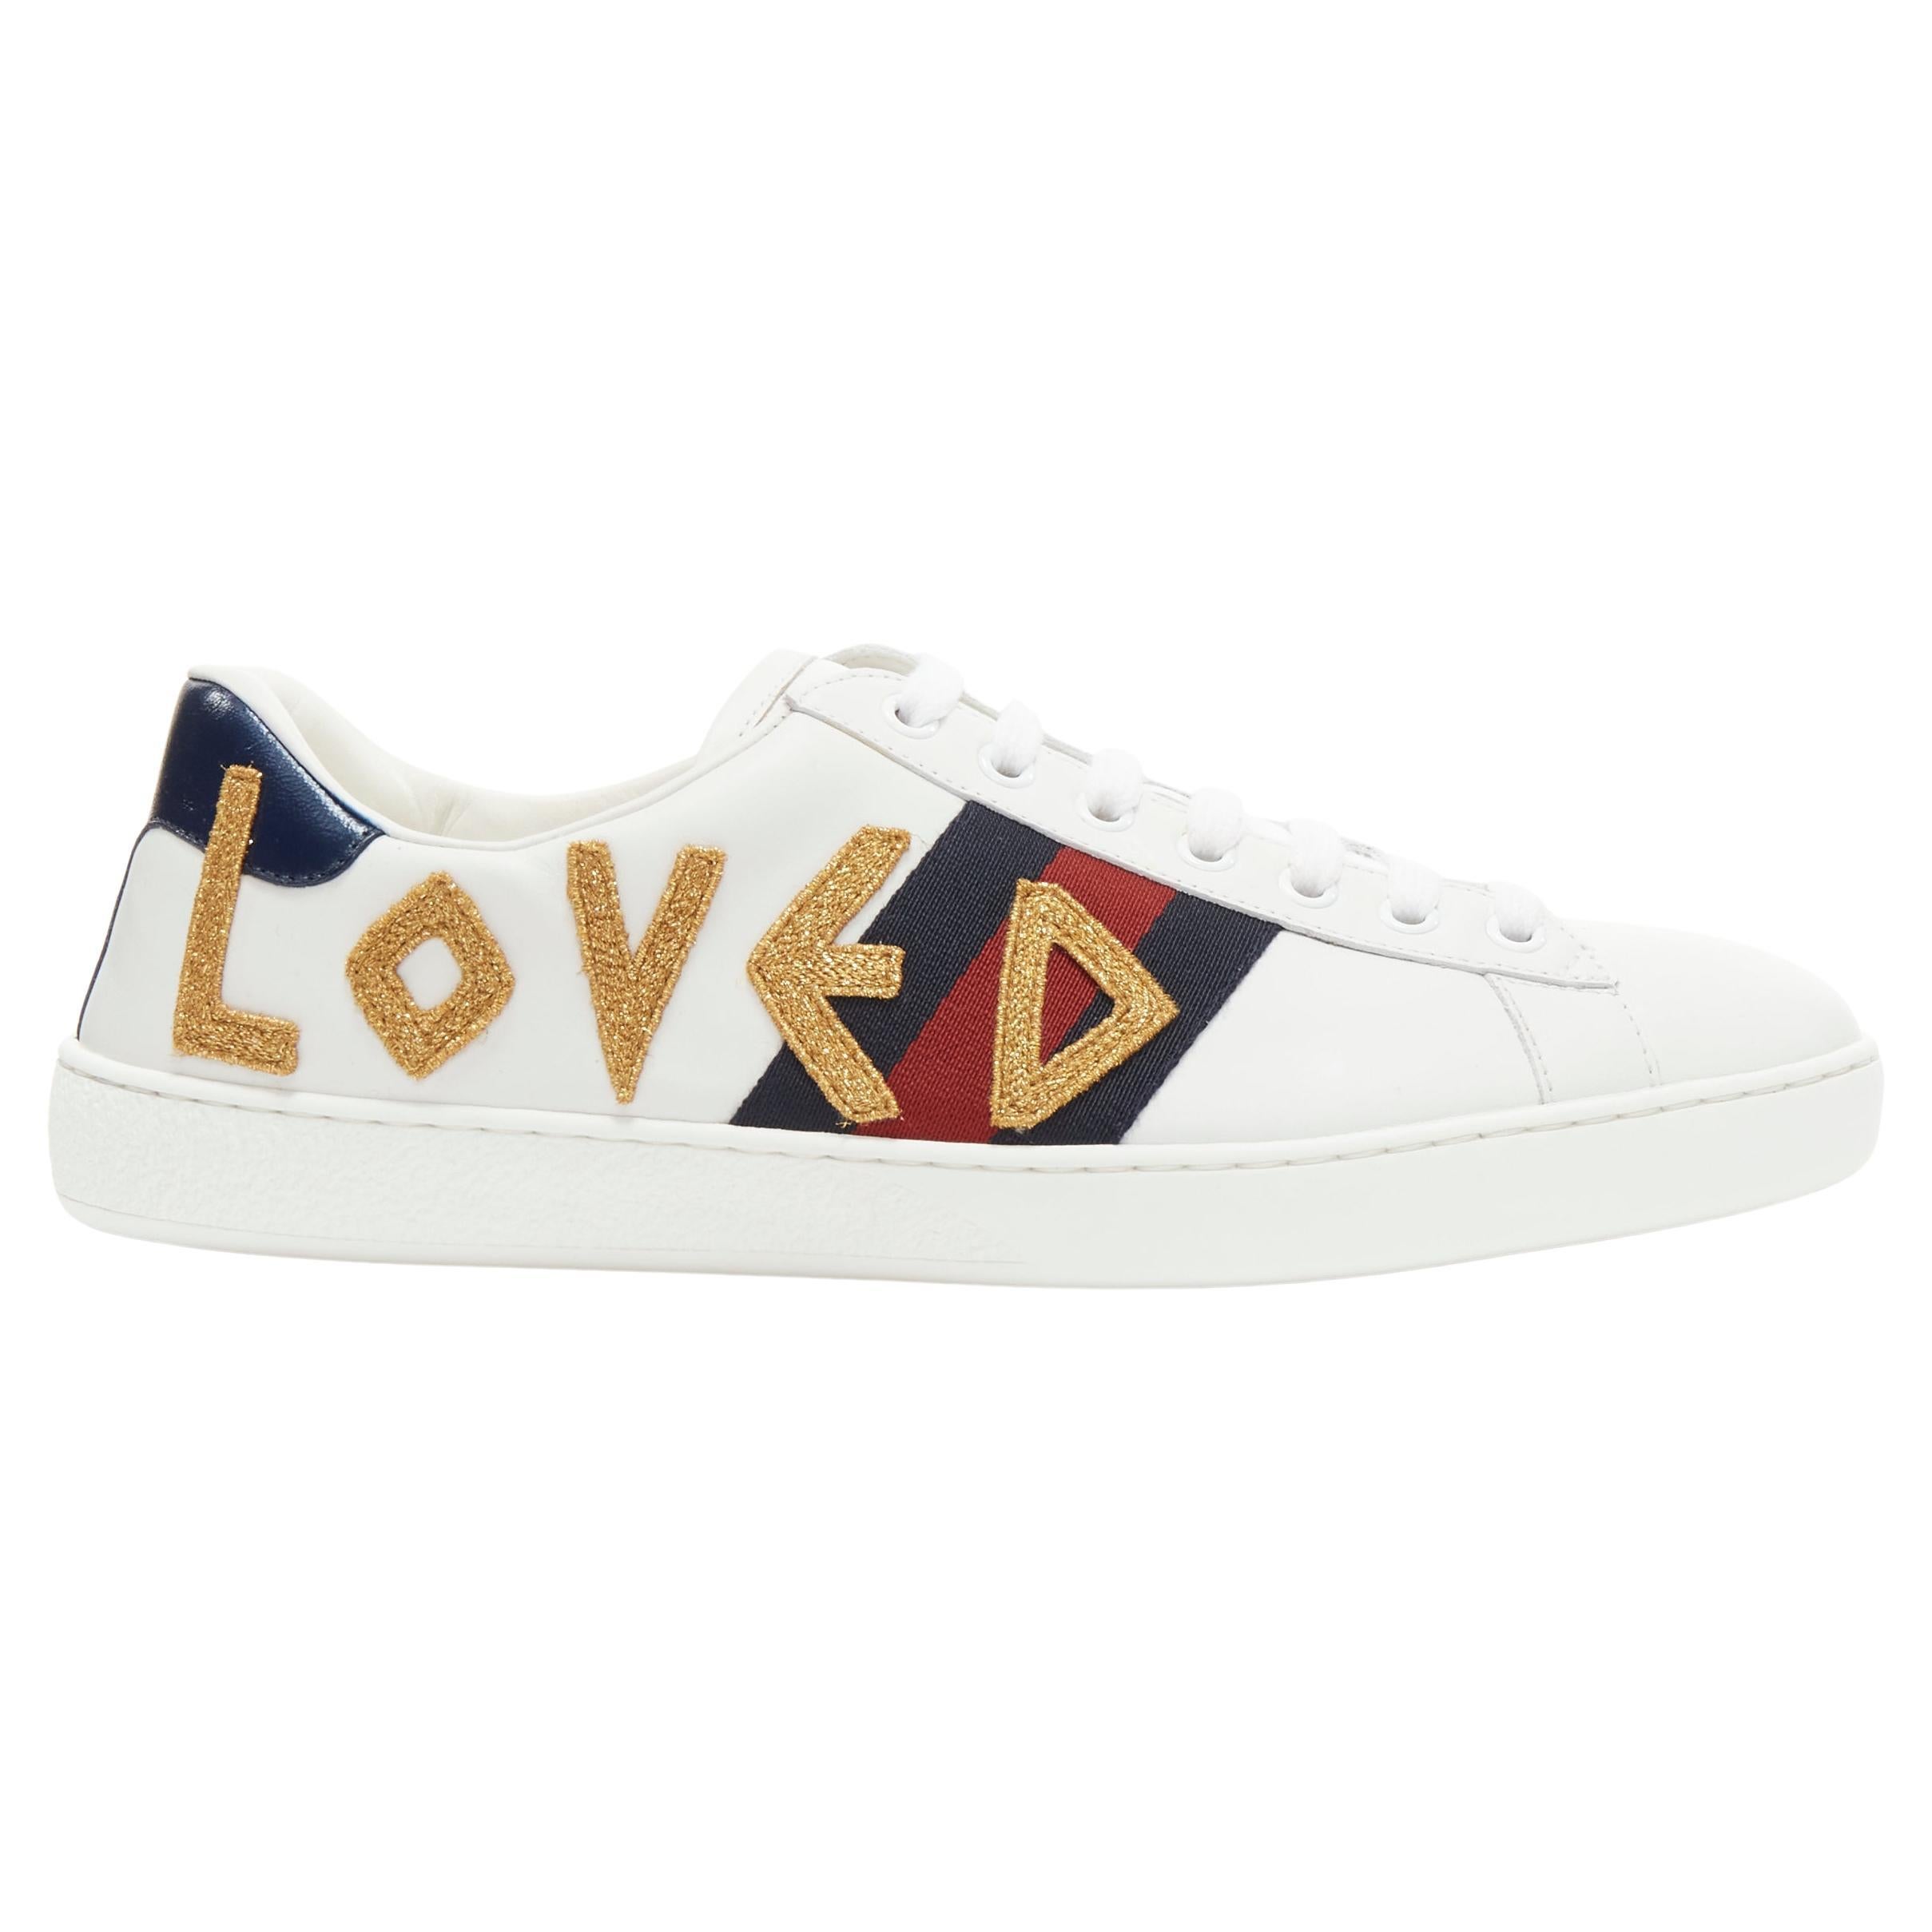 GUCCI Ace Loved gold embroidered blue red web leather sneakers UK7 EU41 For Sale